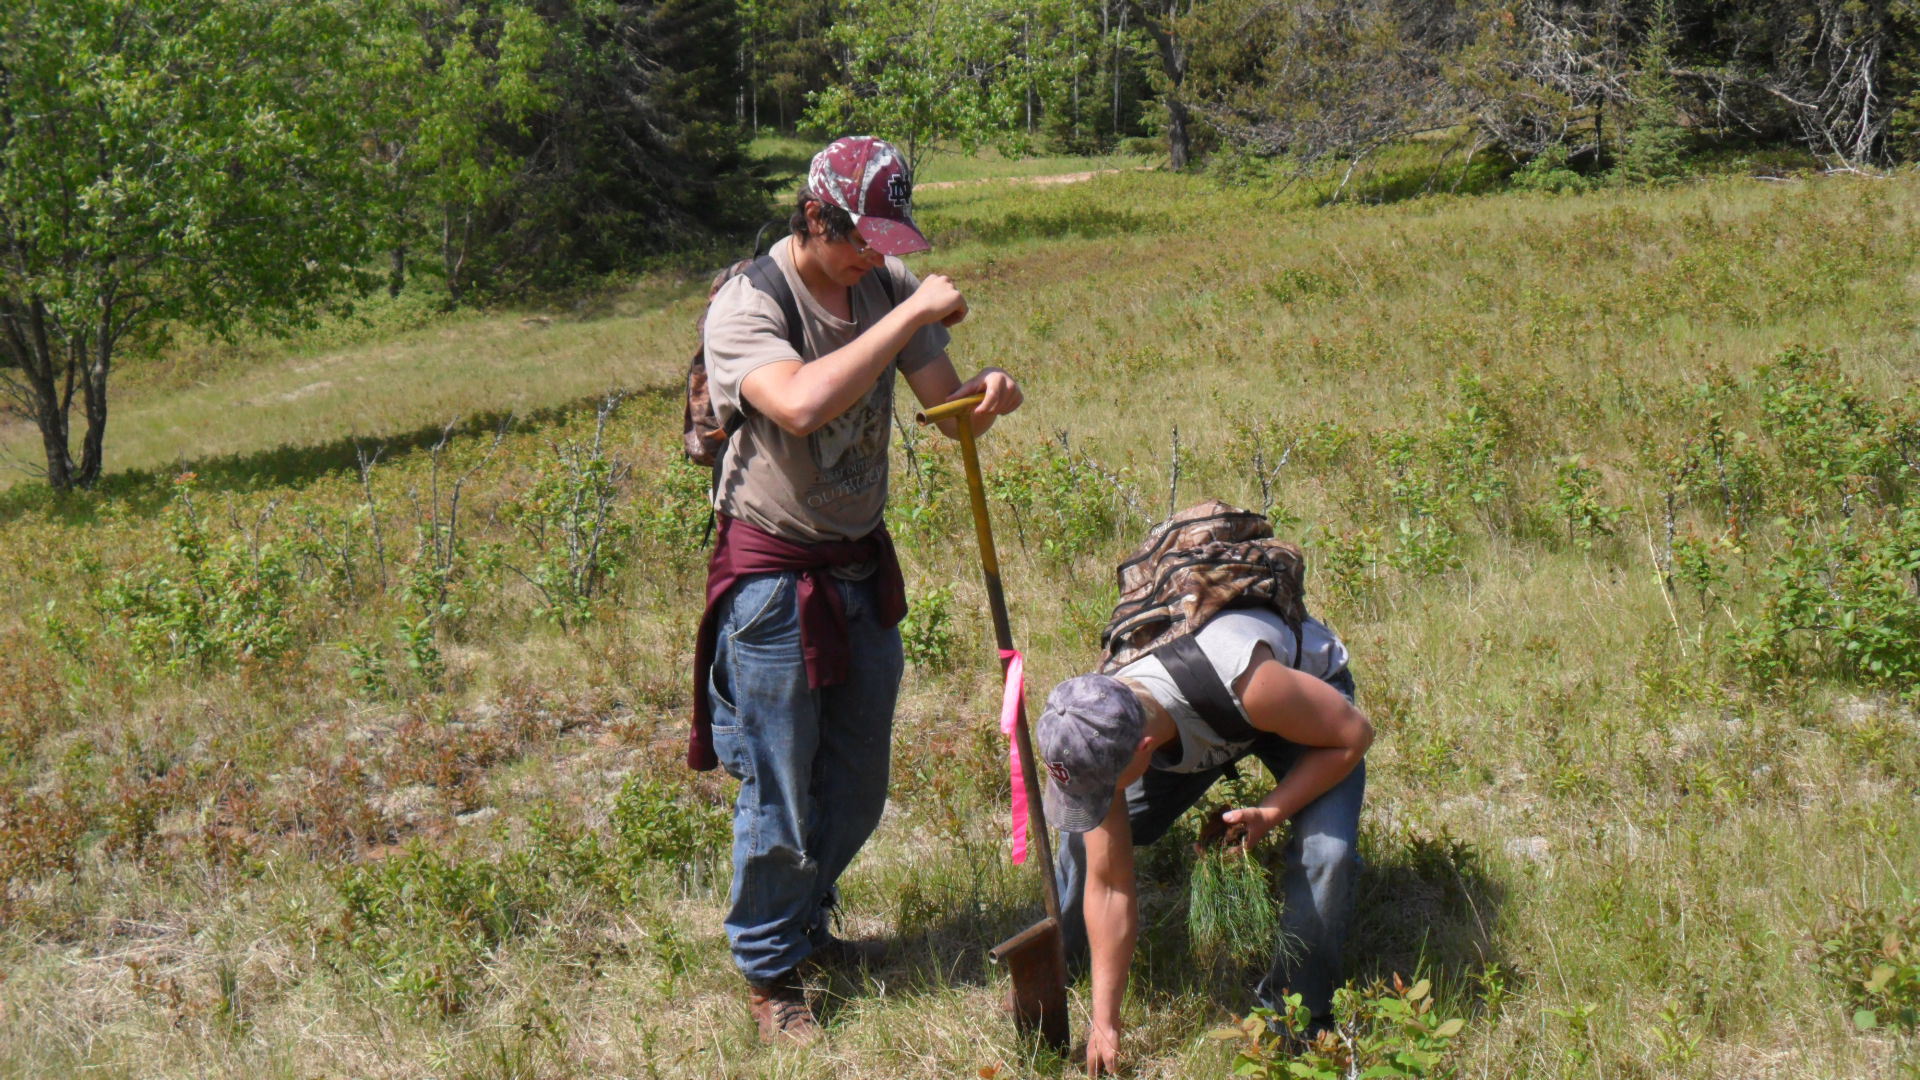 Two students from North Dickinson County Schools plant trees in a green, grassy field at the school forest property near Sagola in spring 2015.